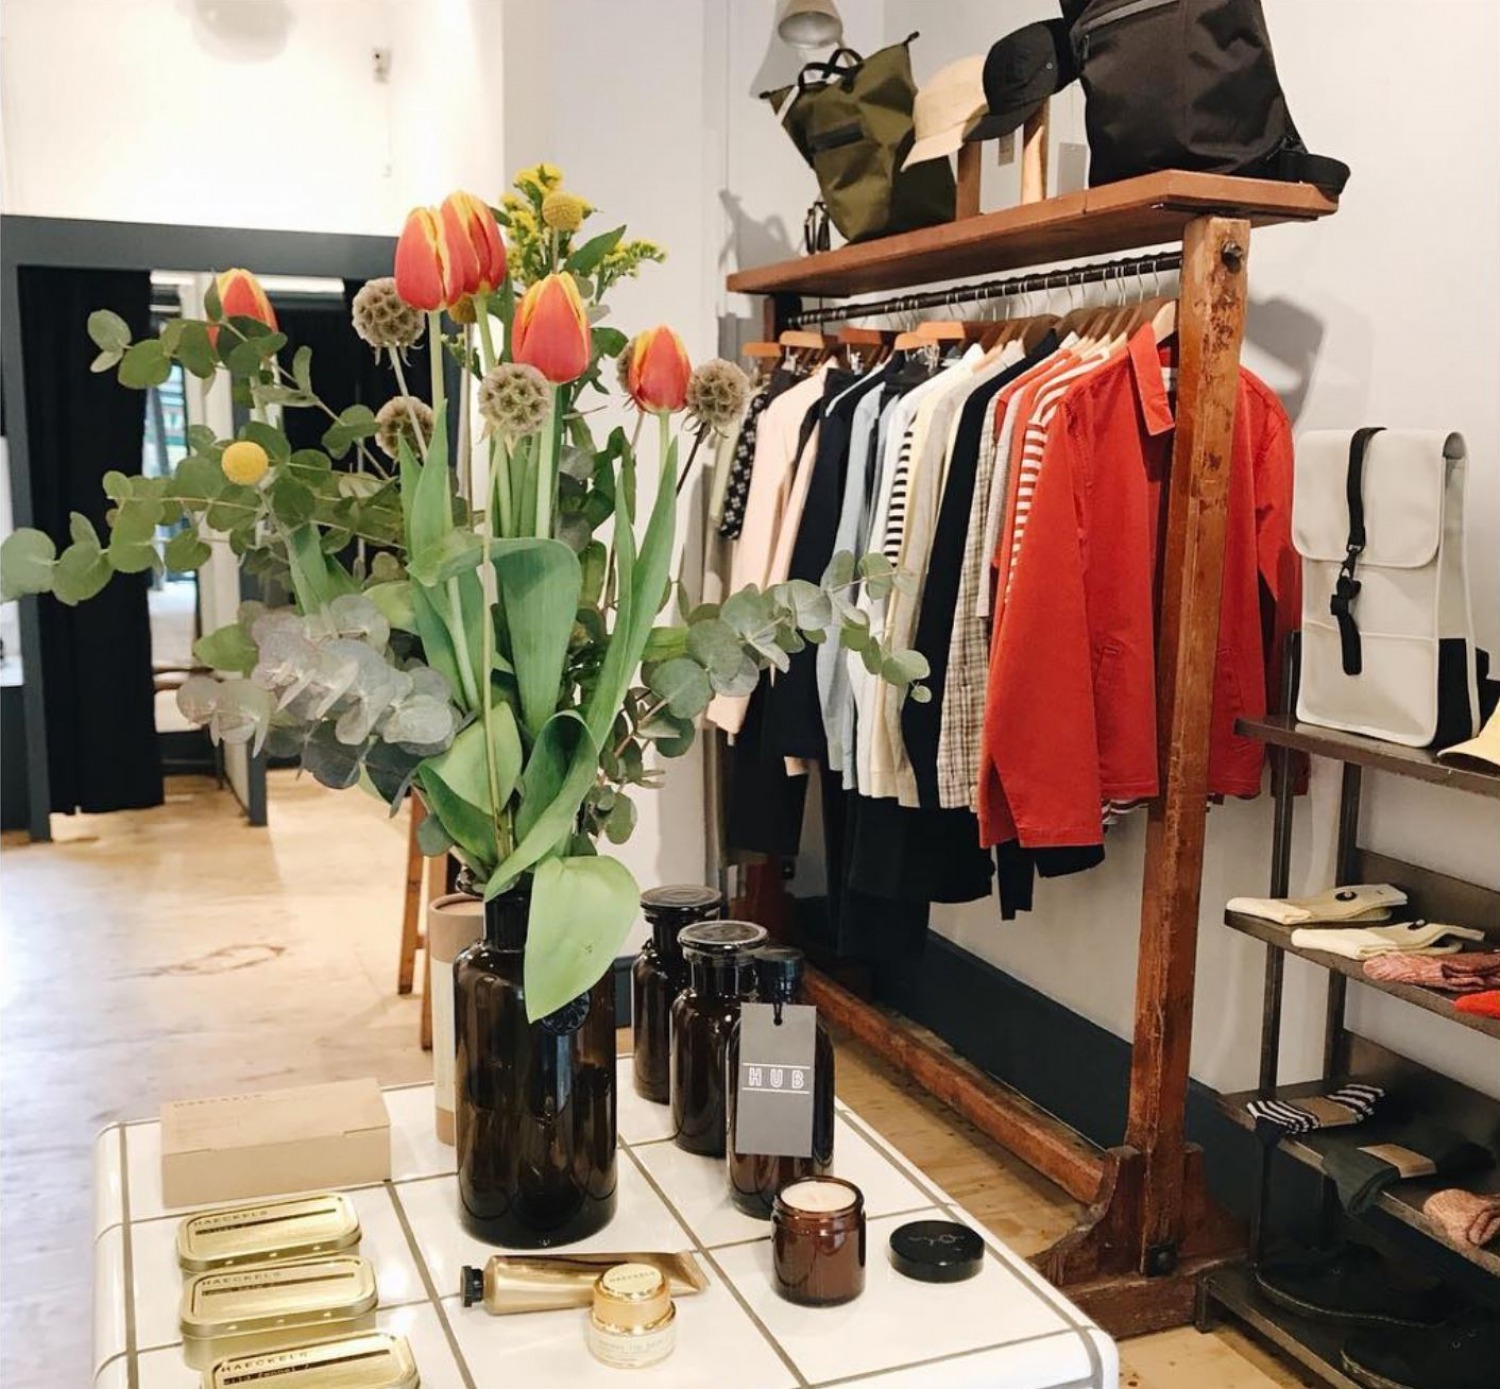 London's Best Hidden Shops To Find Your Most Beautiful Self